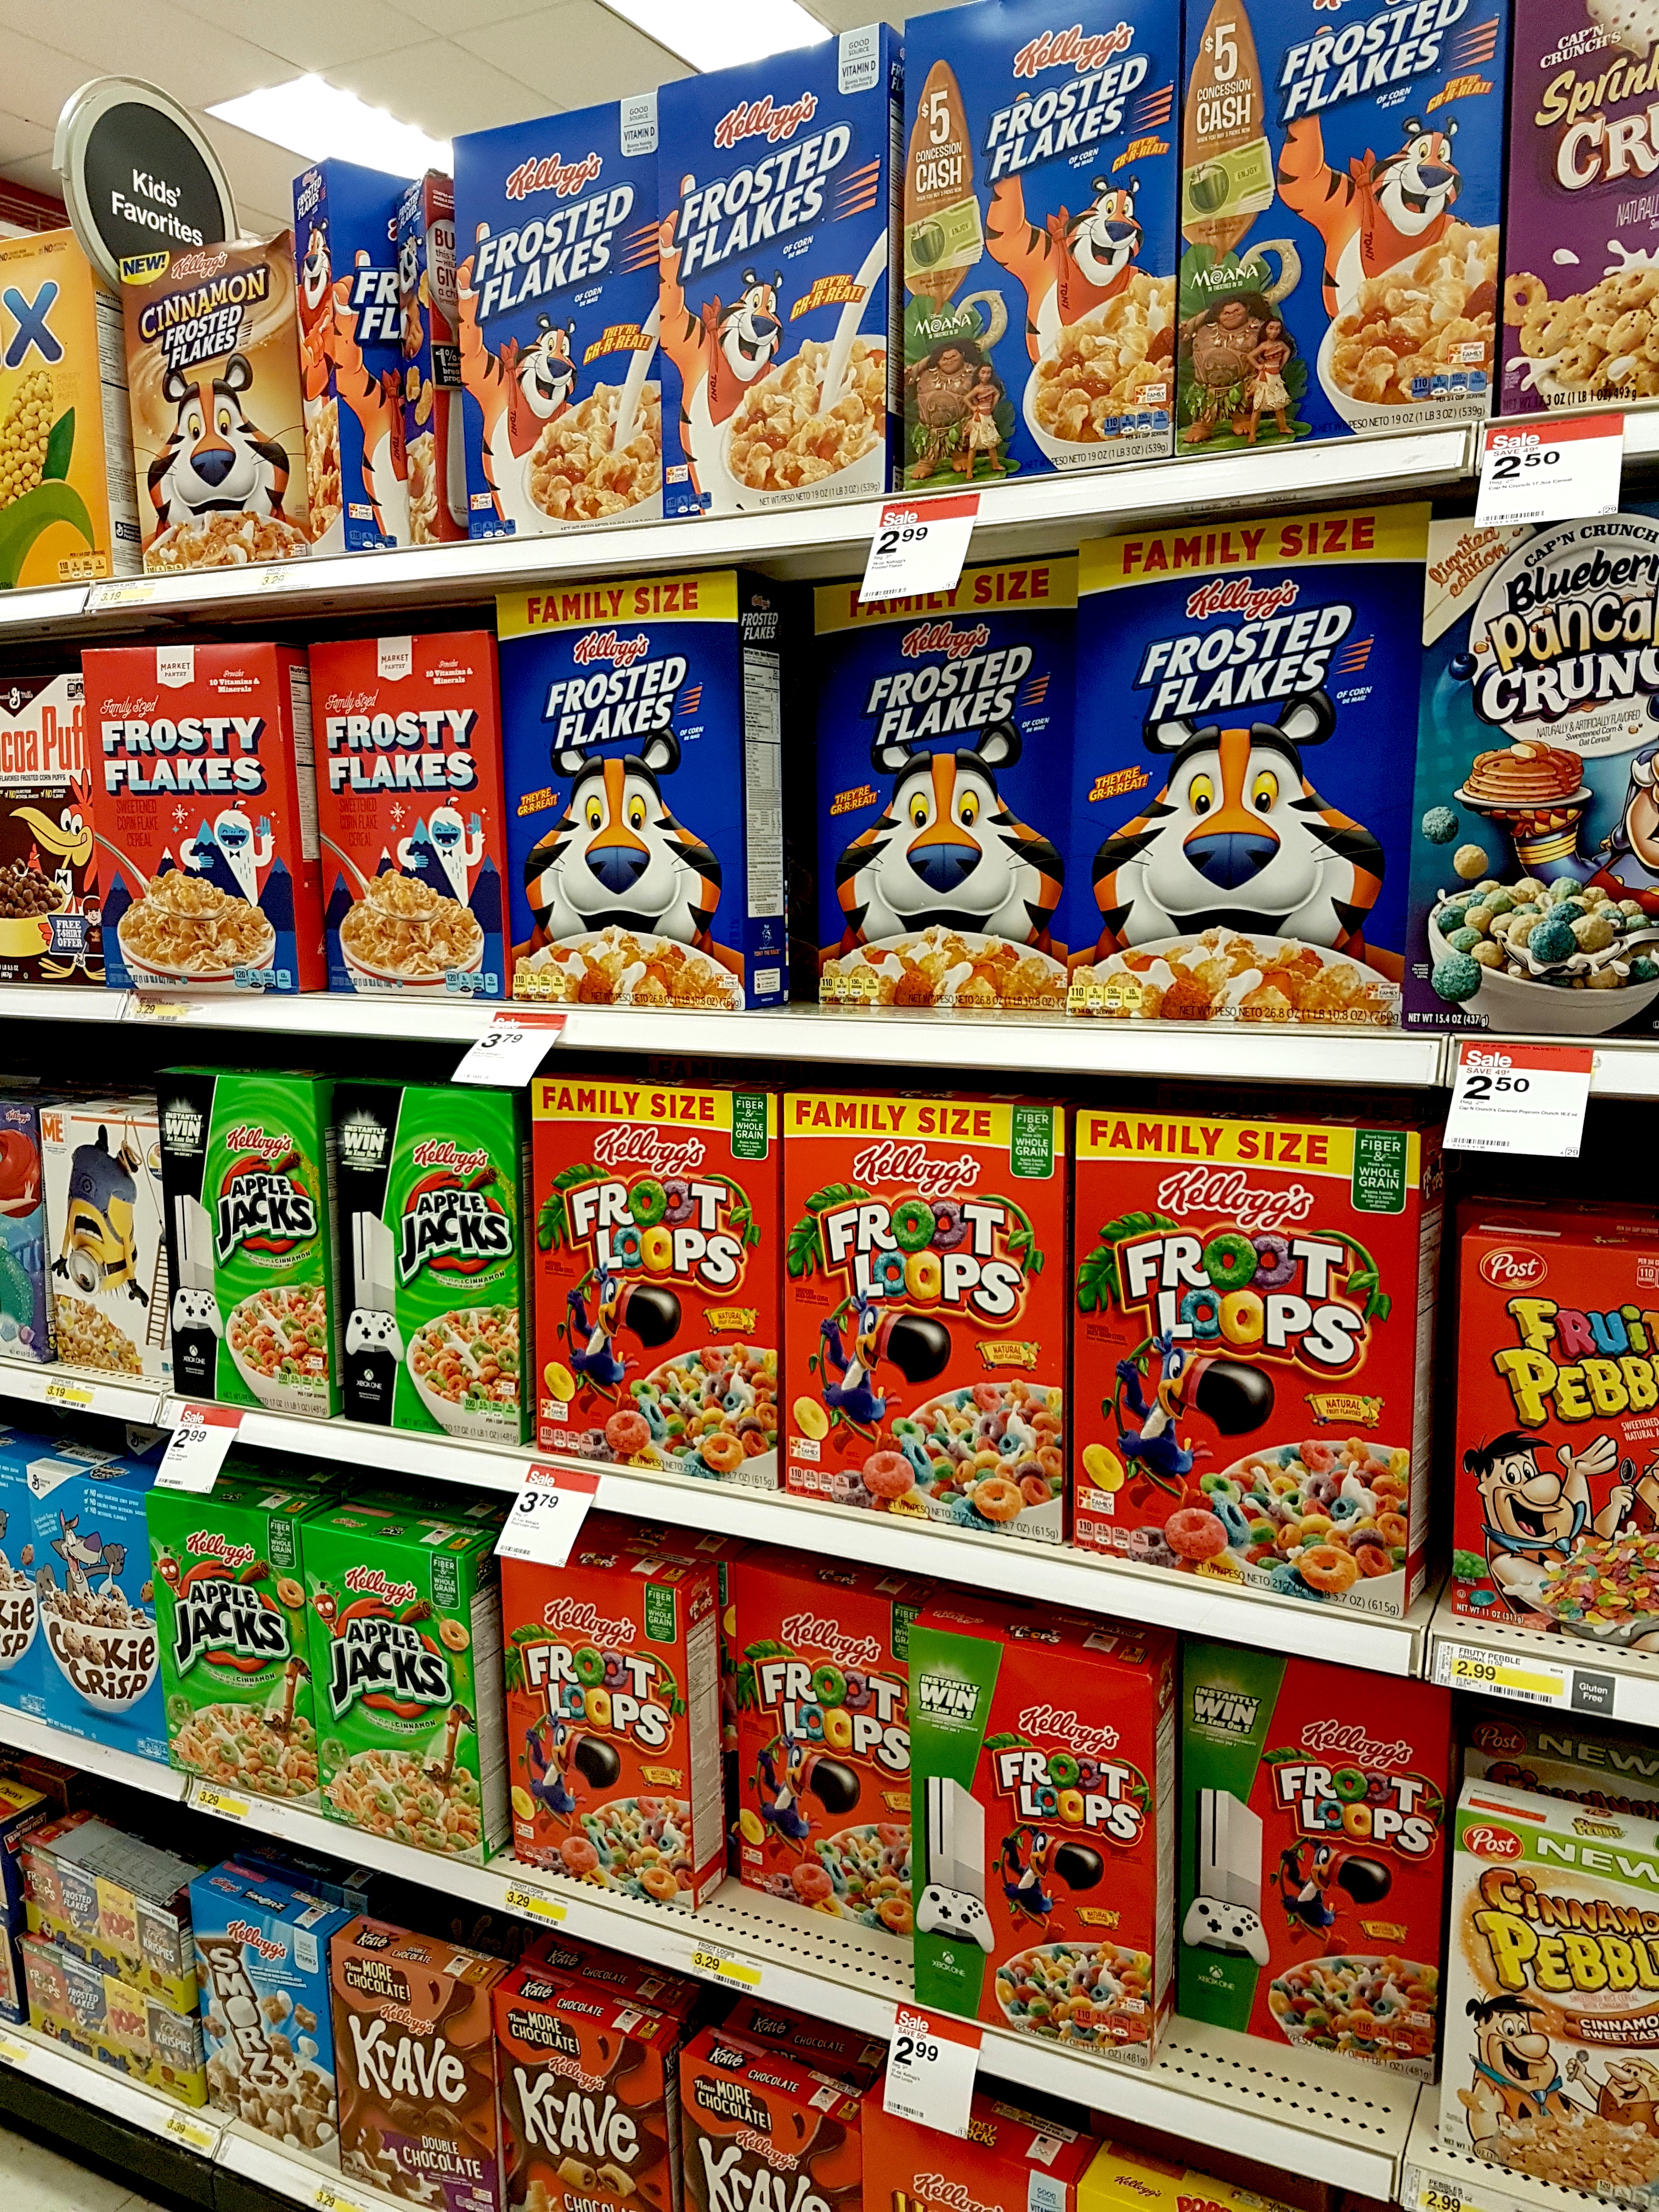 Target Kellog cereals on sale | Breakfast recipe for a cereal yogurt parfait with fruit. Ideas for Kellogg cereal parfait: Apple Jacks, Froot Loops, and Frosted Flakes. Fun breakfast idea!